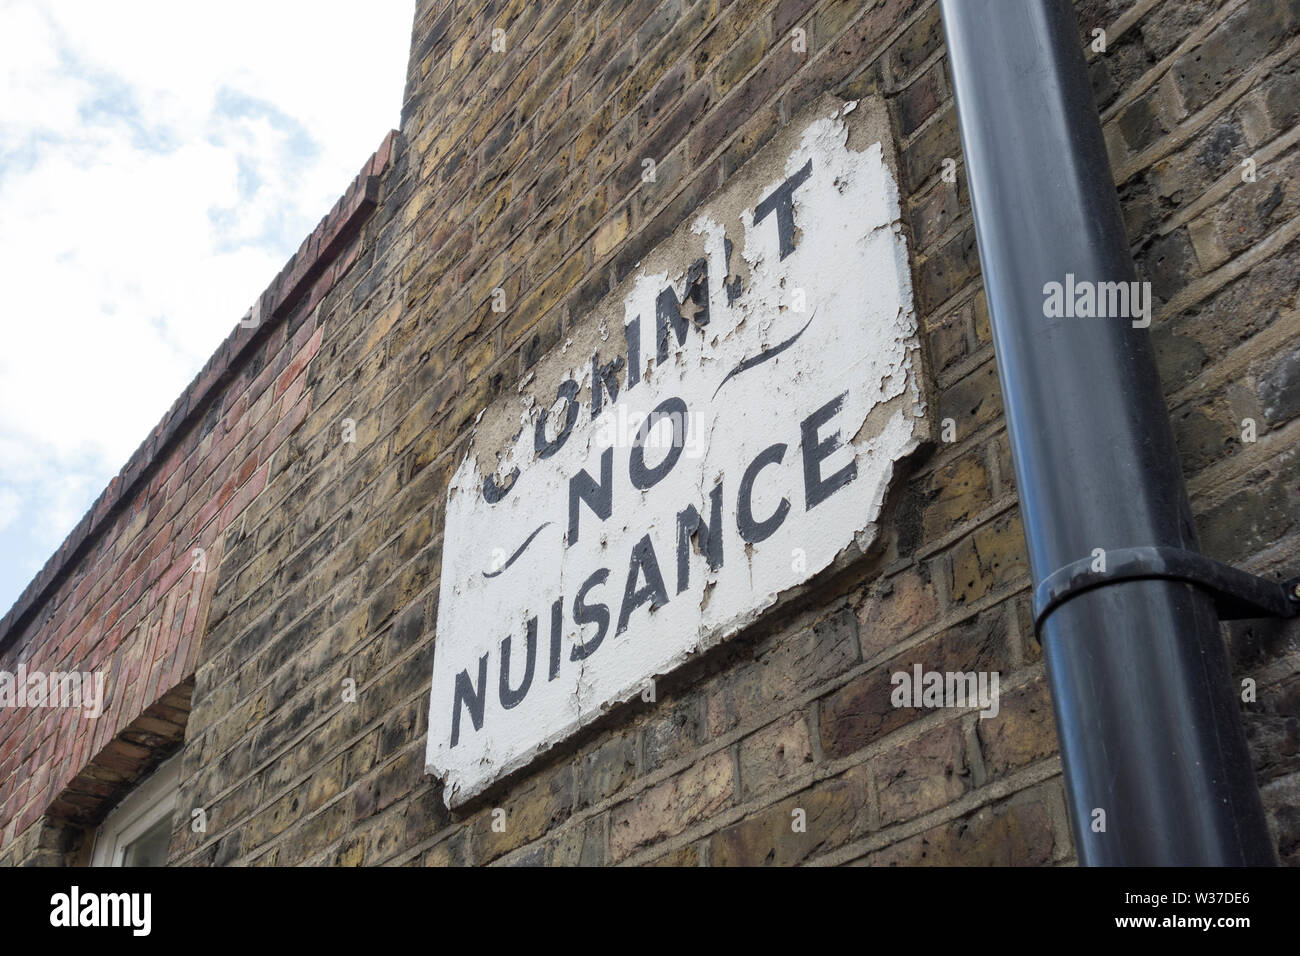 A Victorian 'Commit no nuisance' street sign in Doyce Street, London, SE1, UK Stock Photo